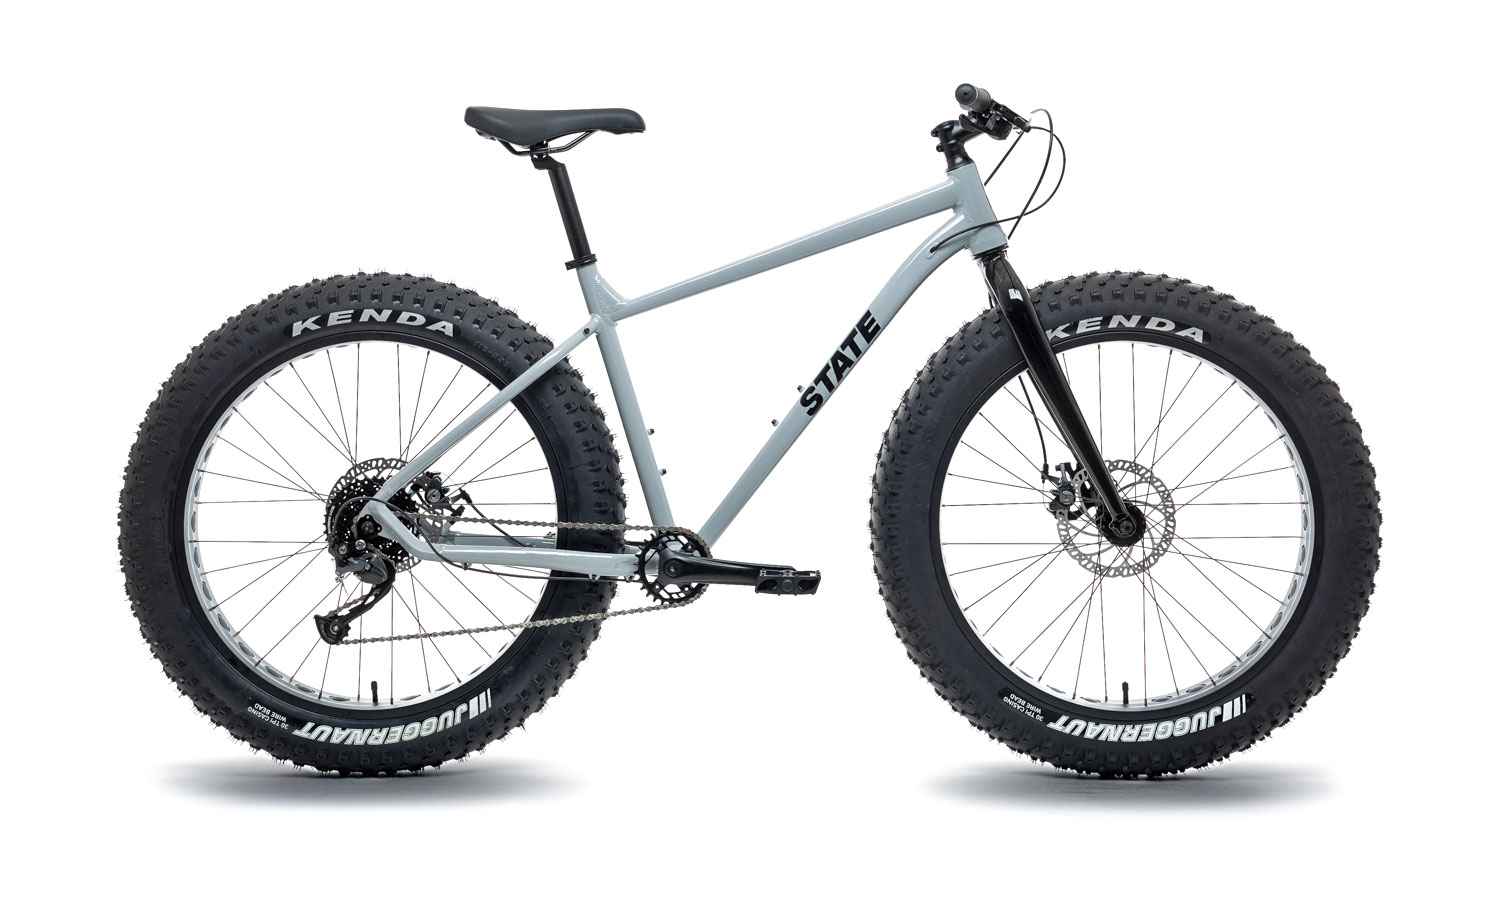 State Bicycle Co. 6061 Trail+ Fat Bike, an affordable alloy budget entry-level aluminum fatbike, Stone Grey complete